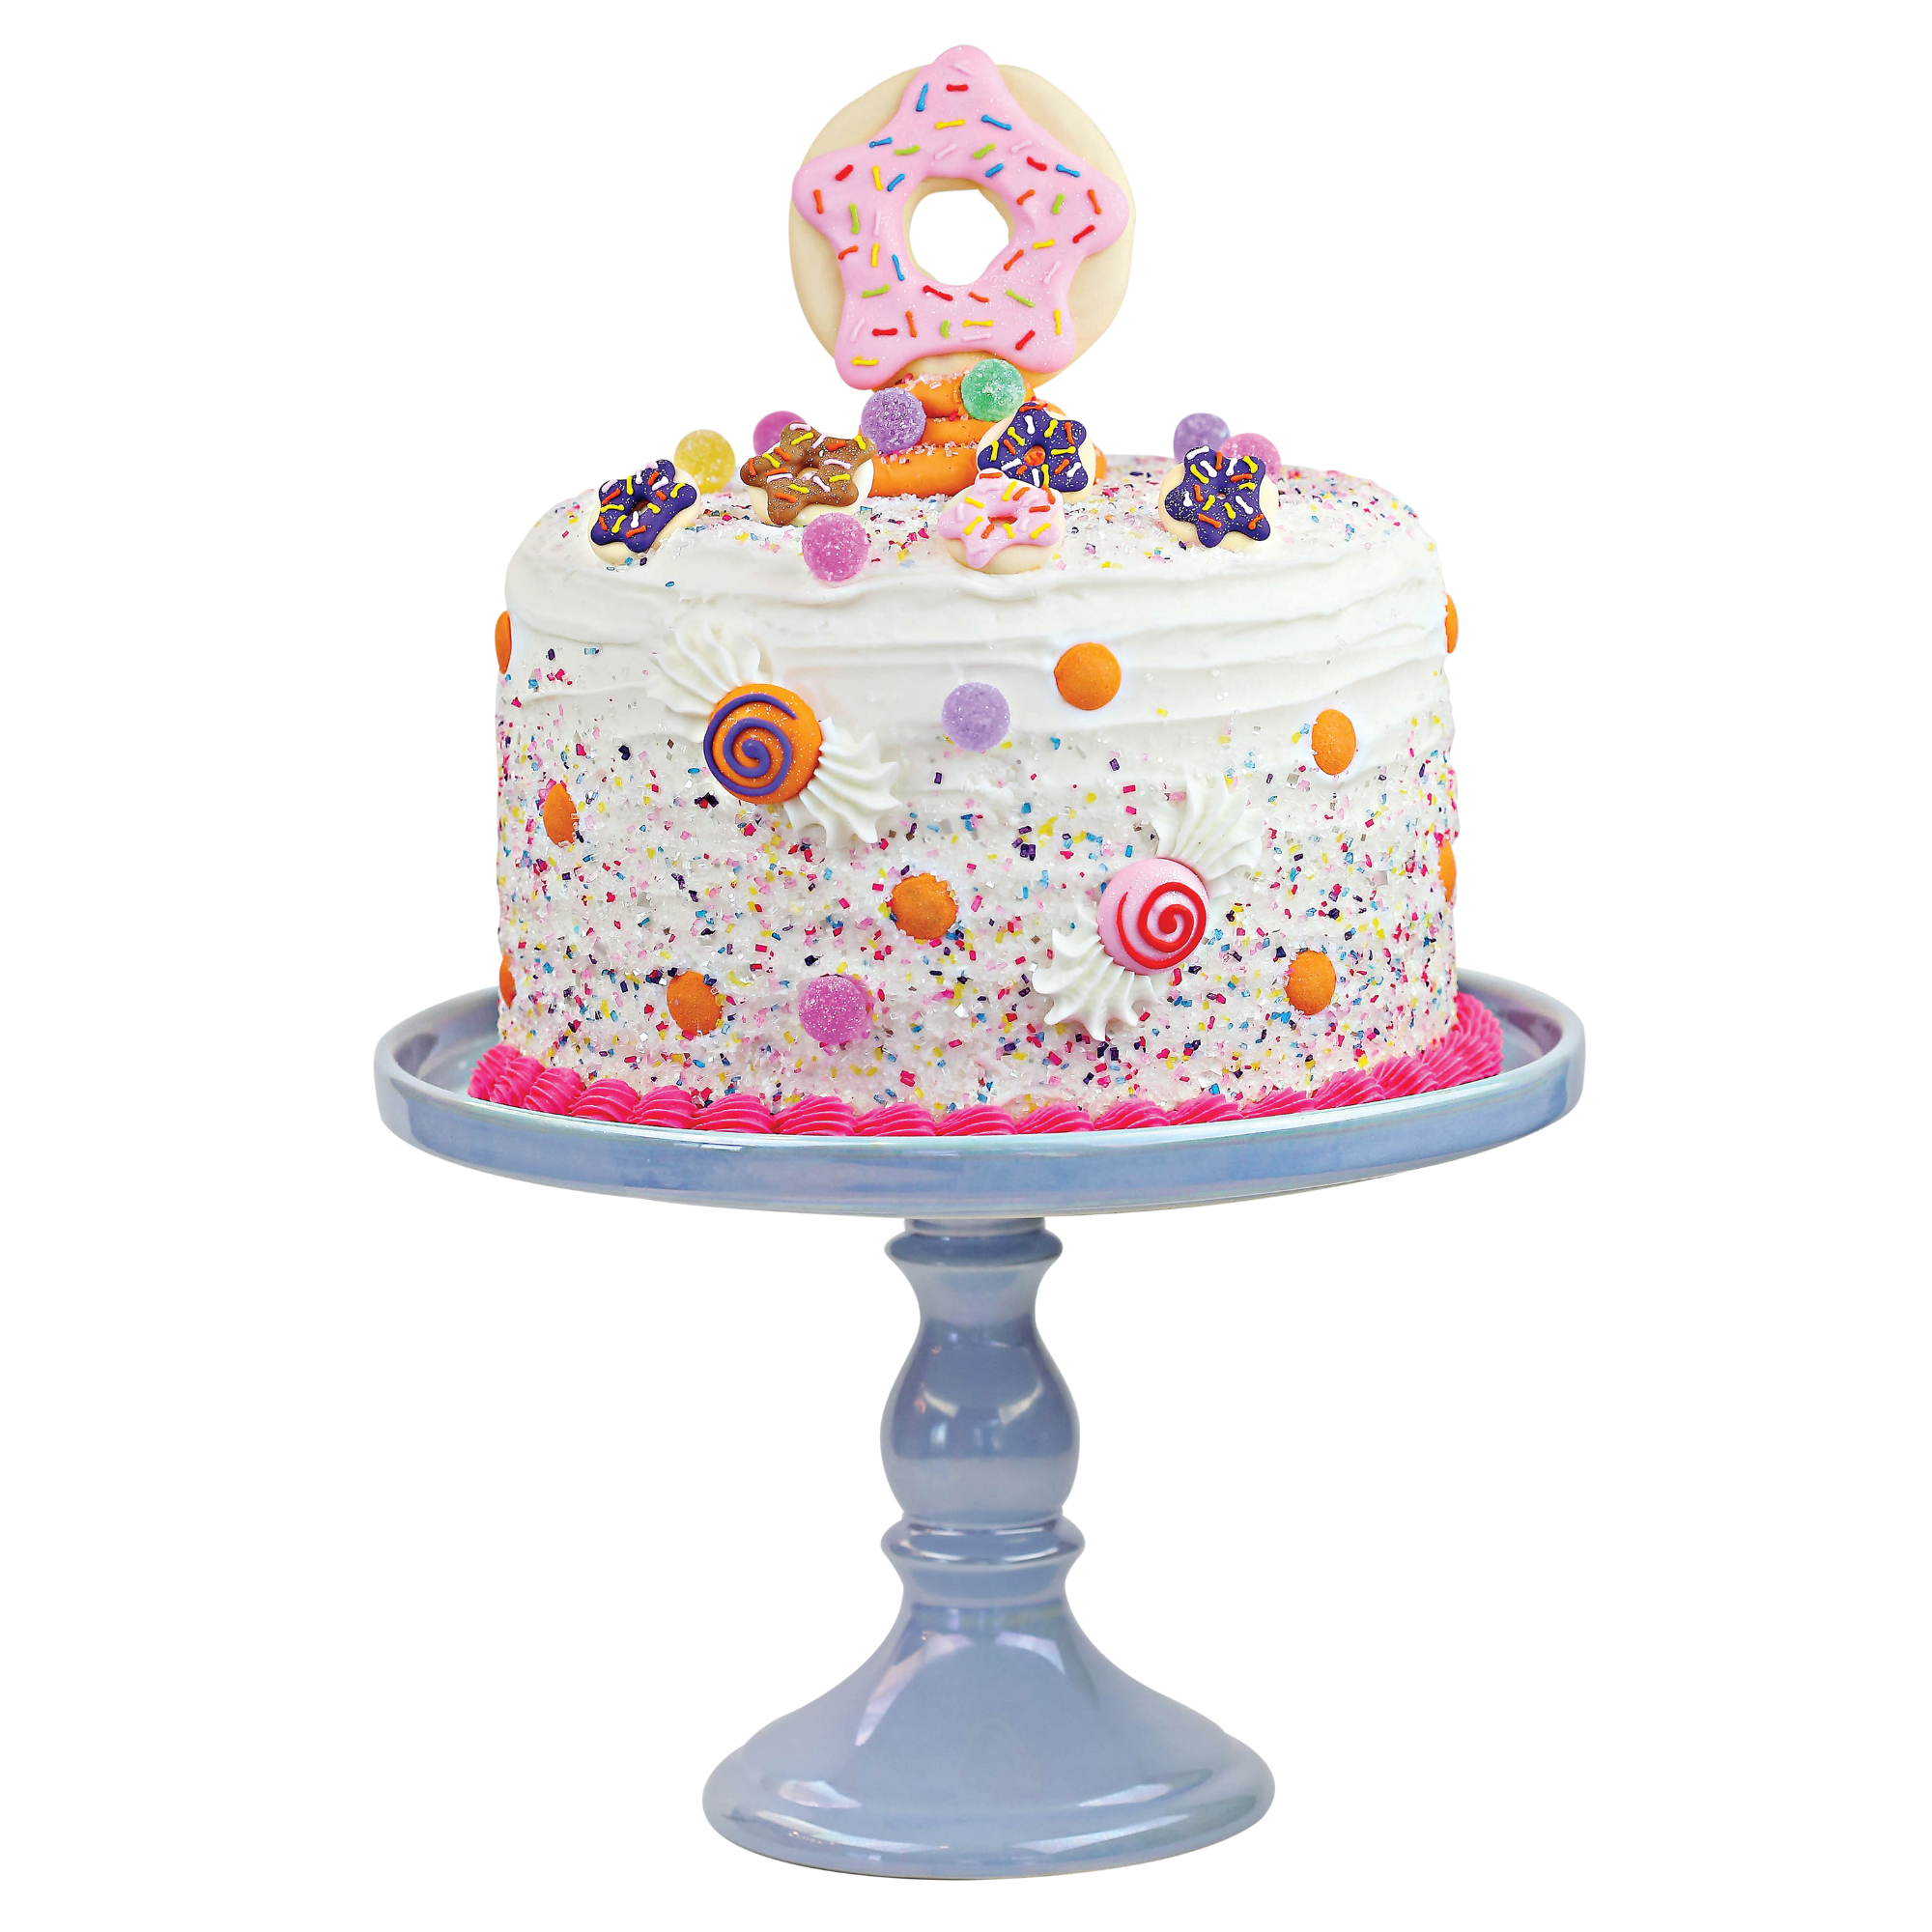 Donuts and Sweets Designer Cake Decor